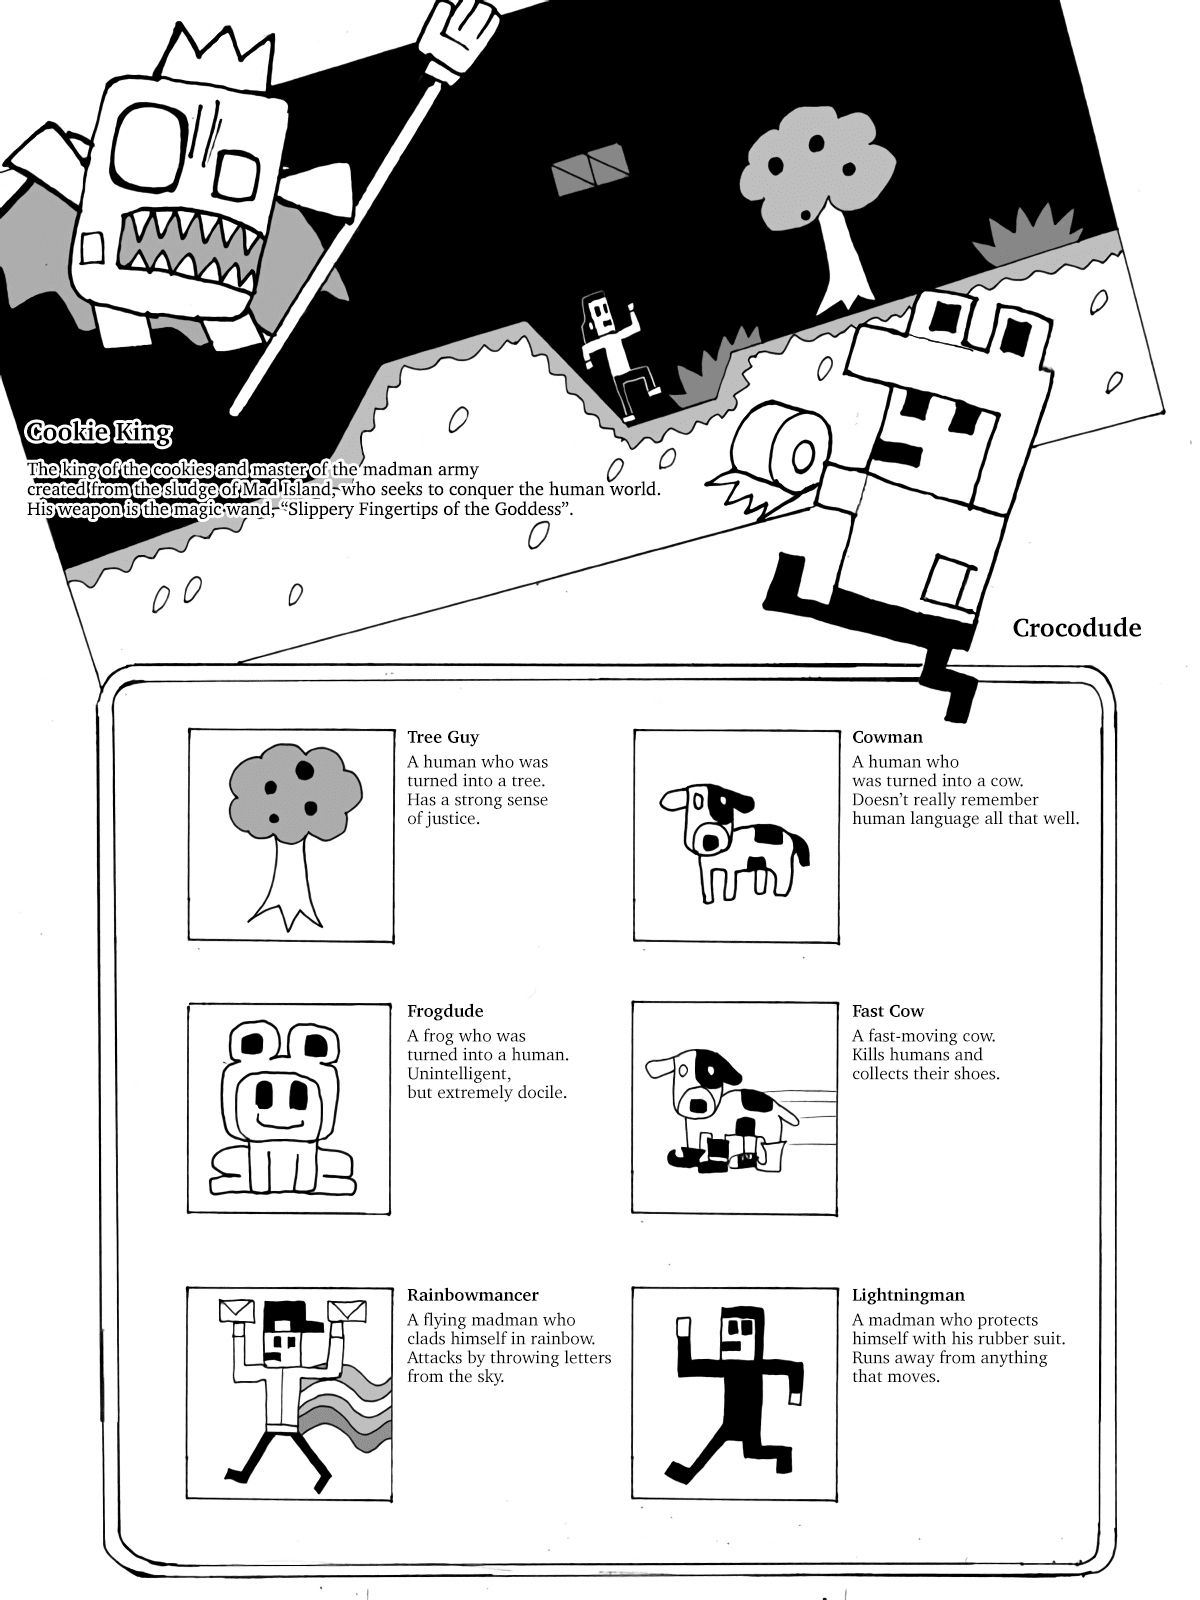 Game Club - Page 2